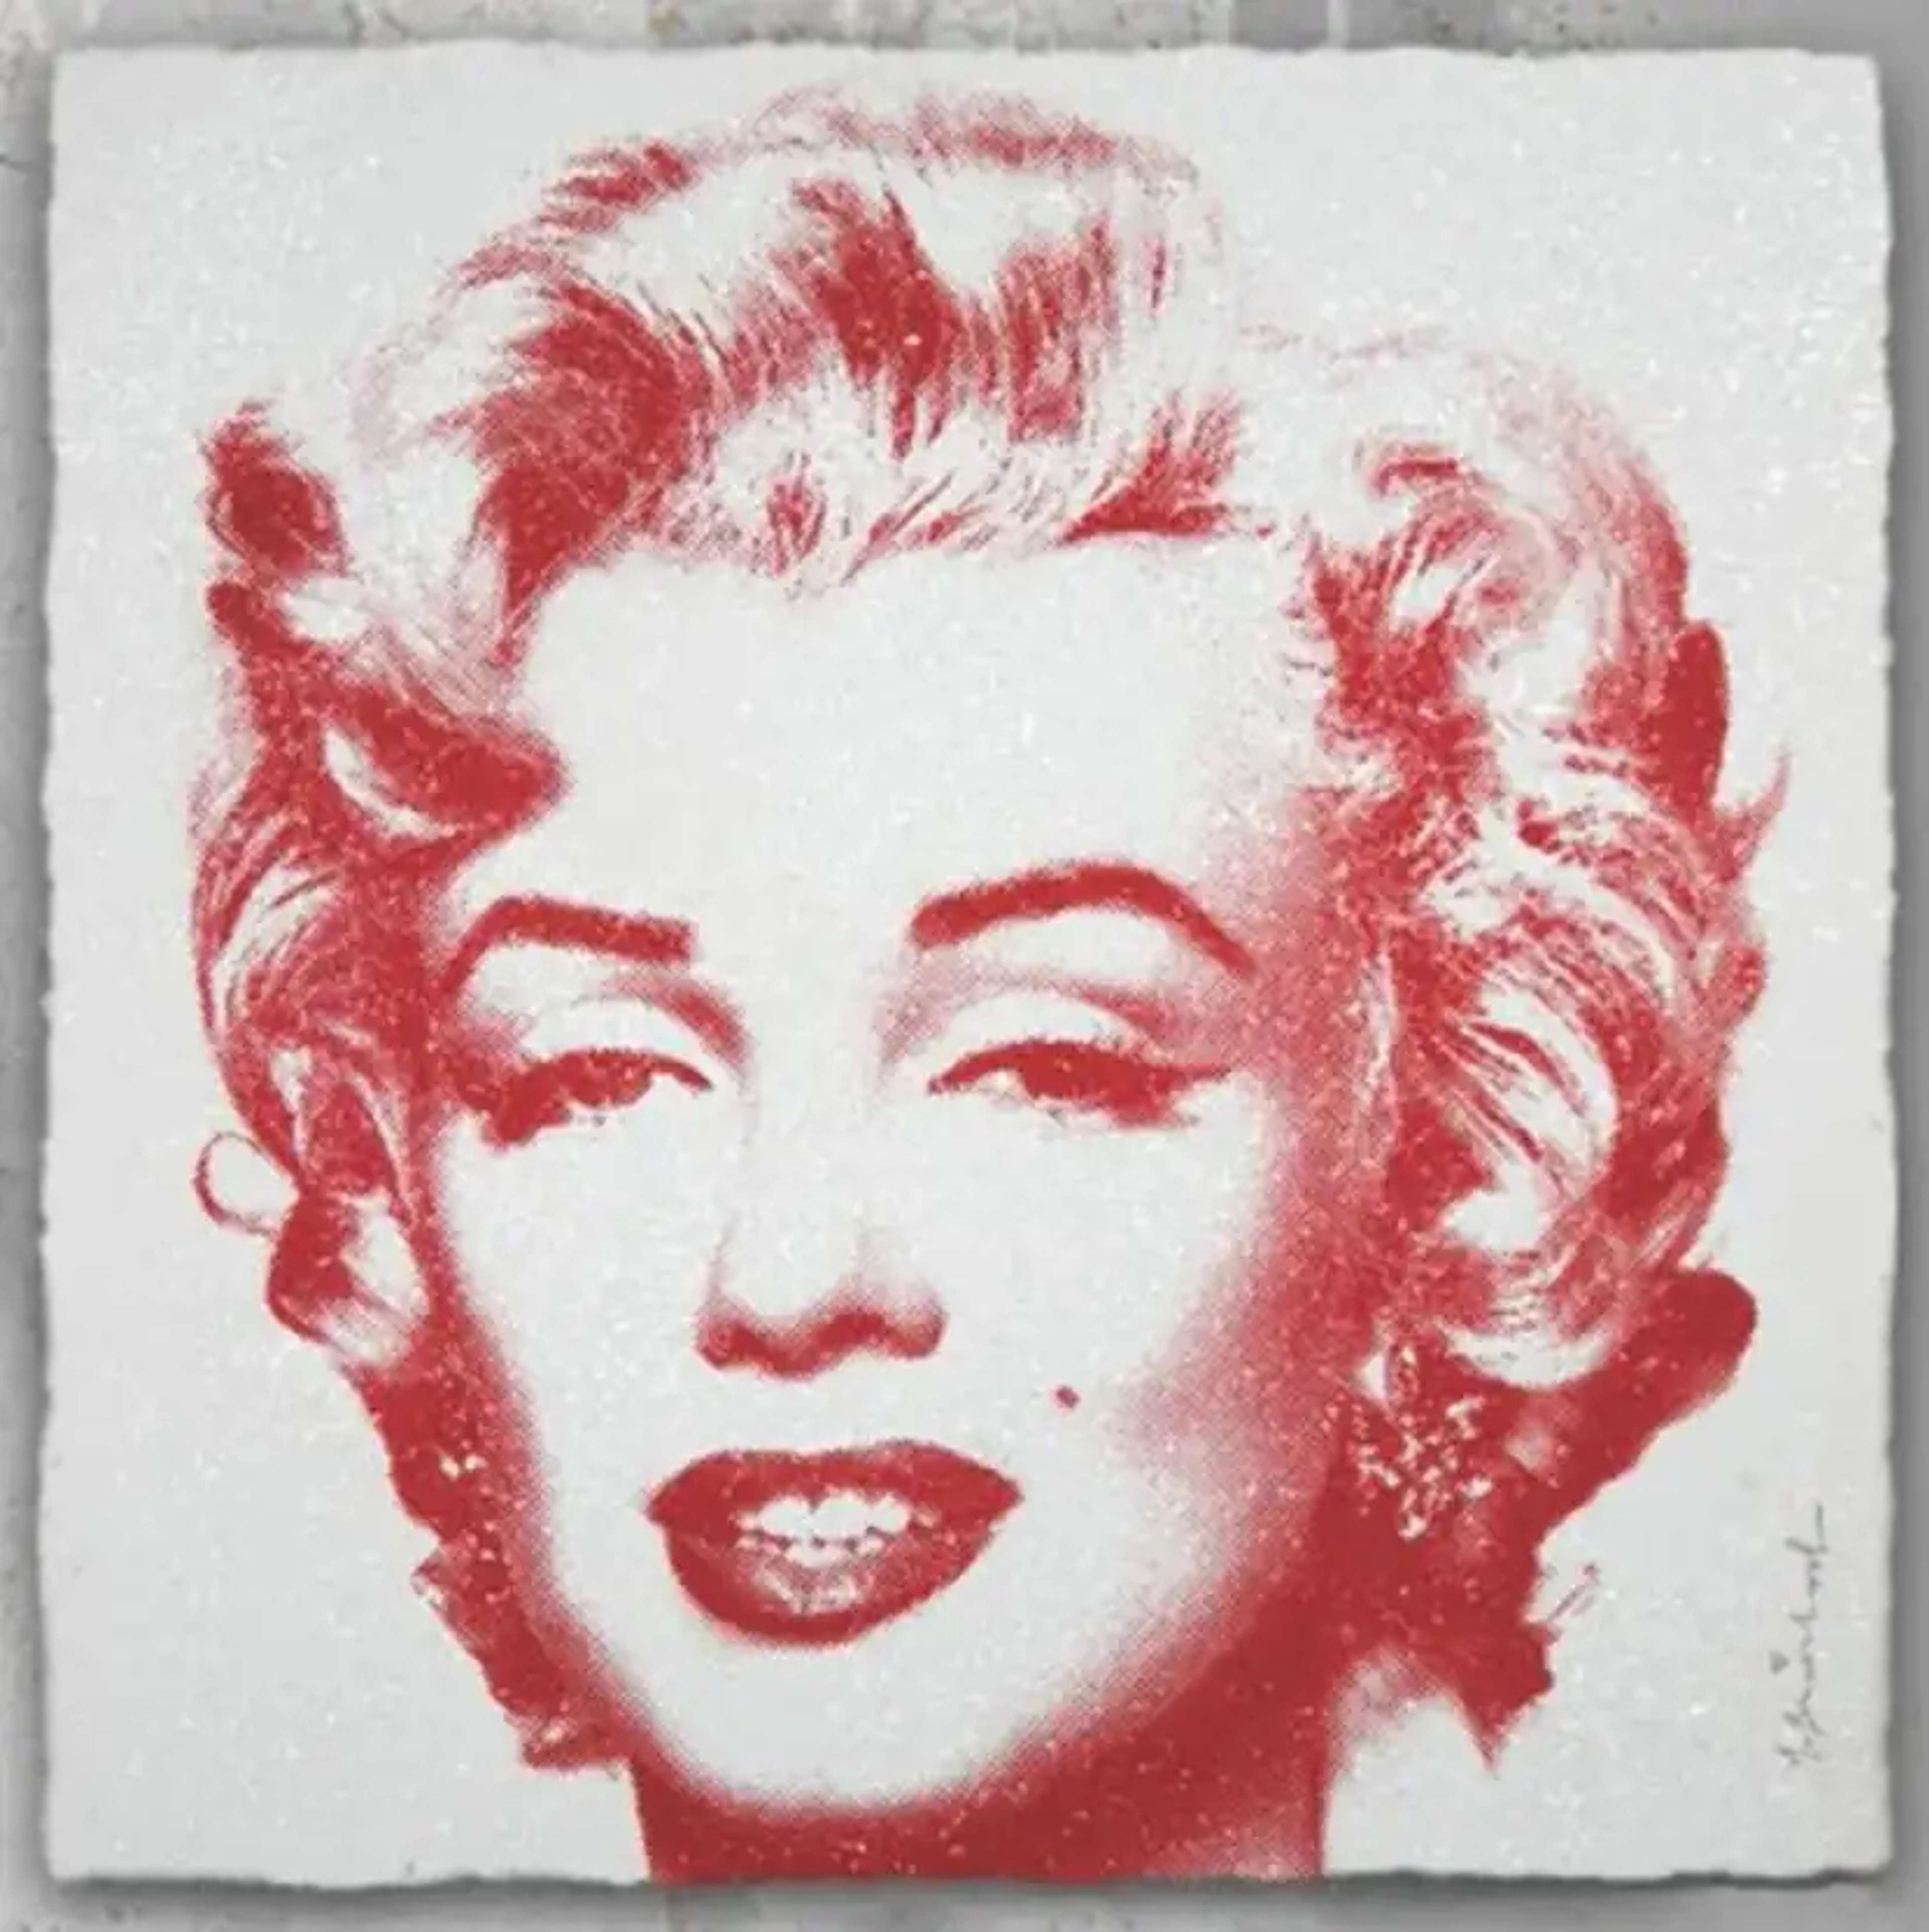 A spray-painted image of American actress and celebrity Marilyn Monroe in a pink hue, set against a white canvas.